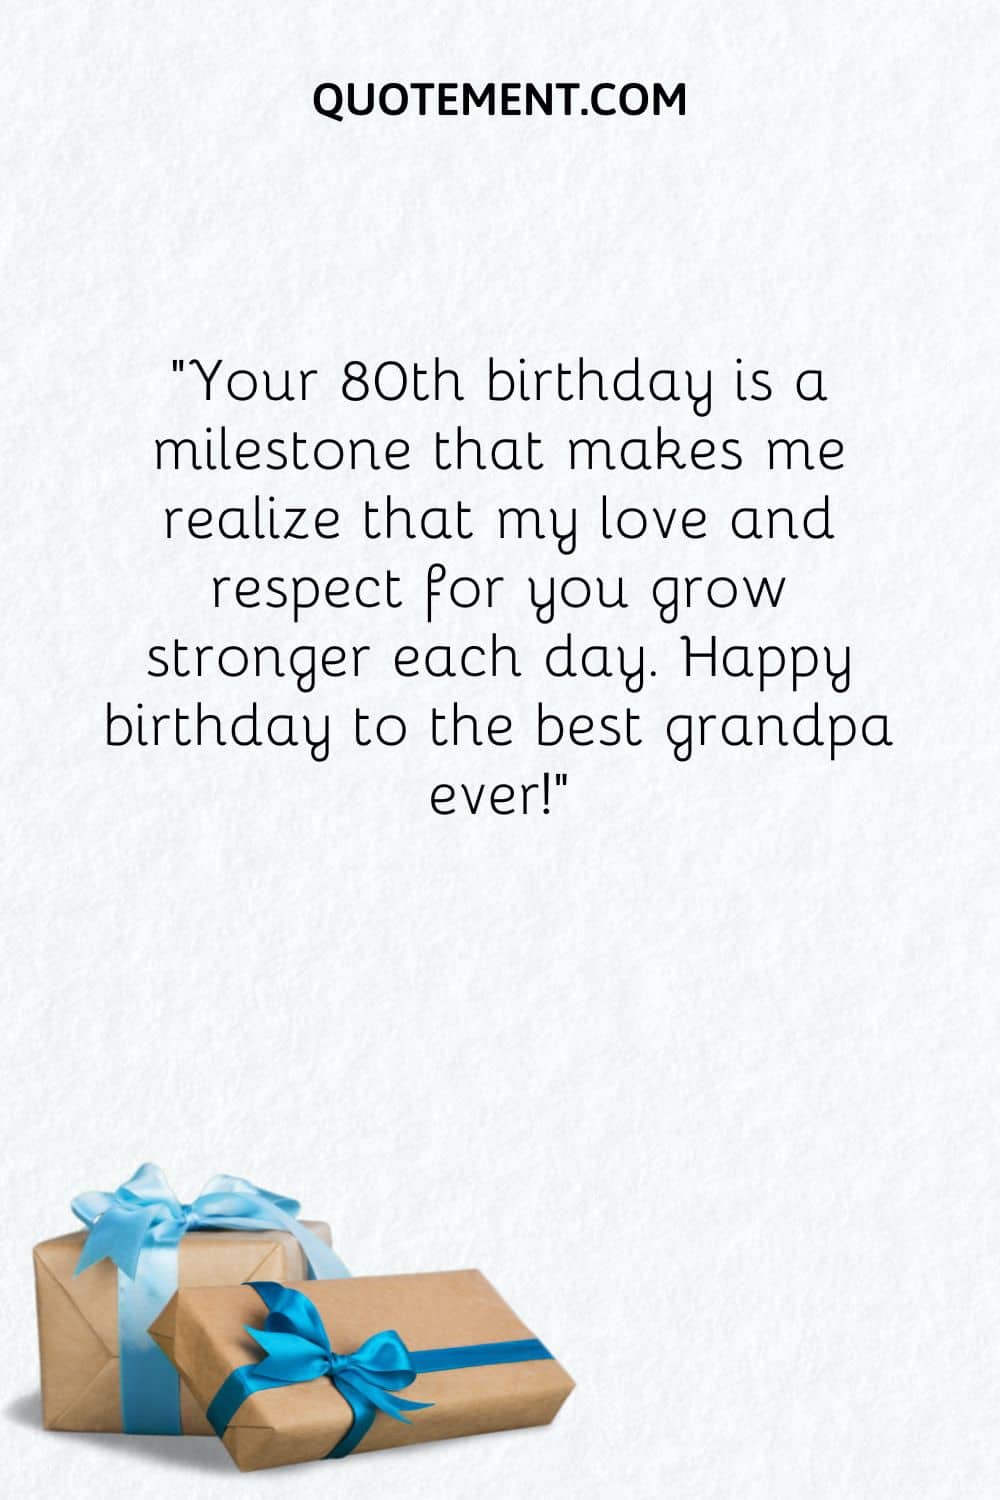 Your 80th birthday is a milestone that makes me realize that my love and respect for you grow stronger each day